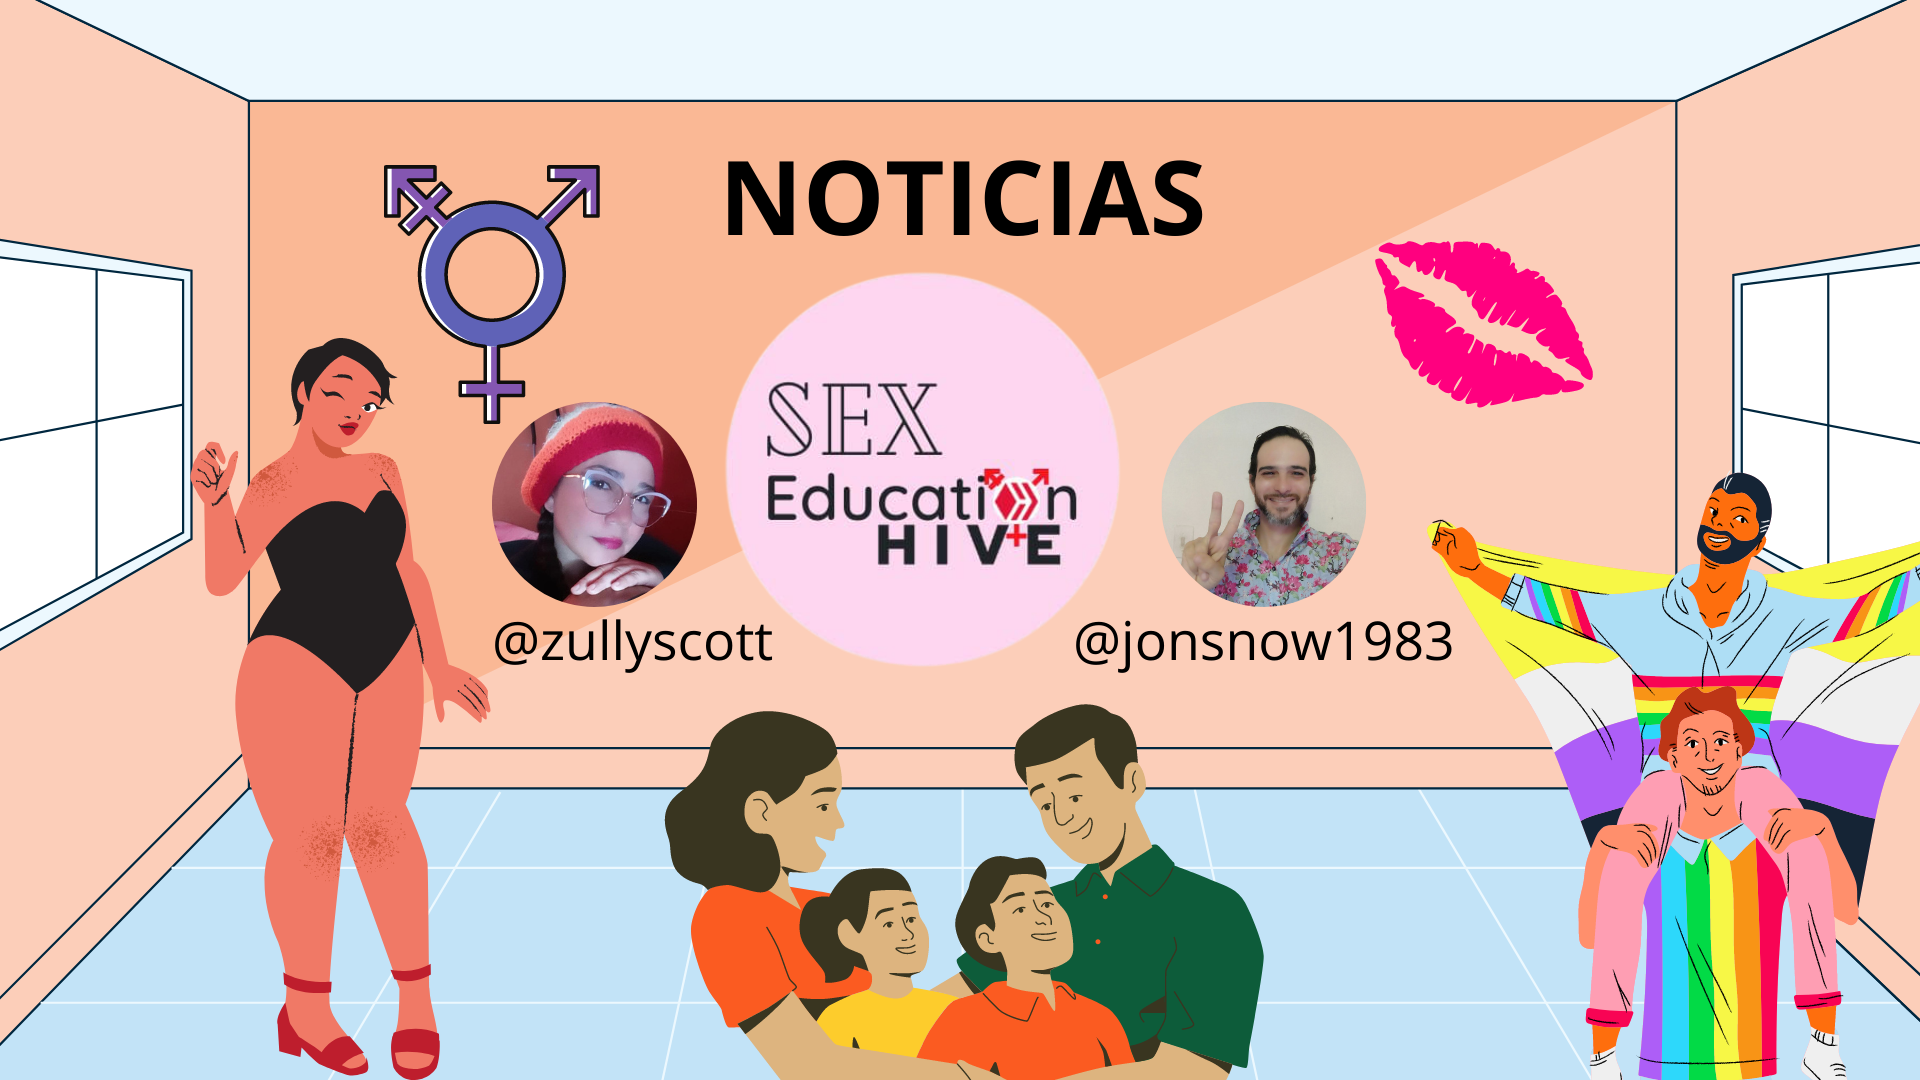 noticias sex education in hive.png